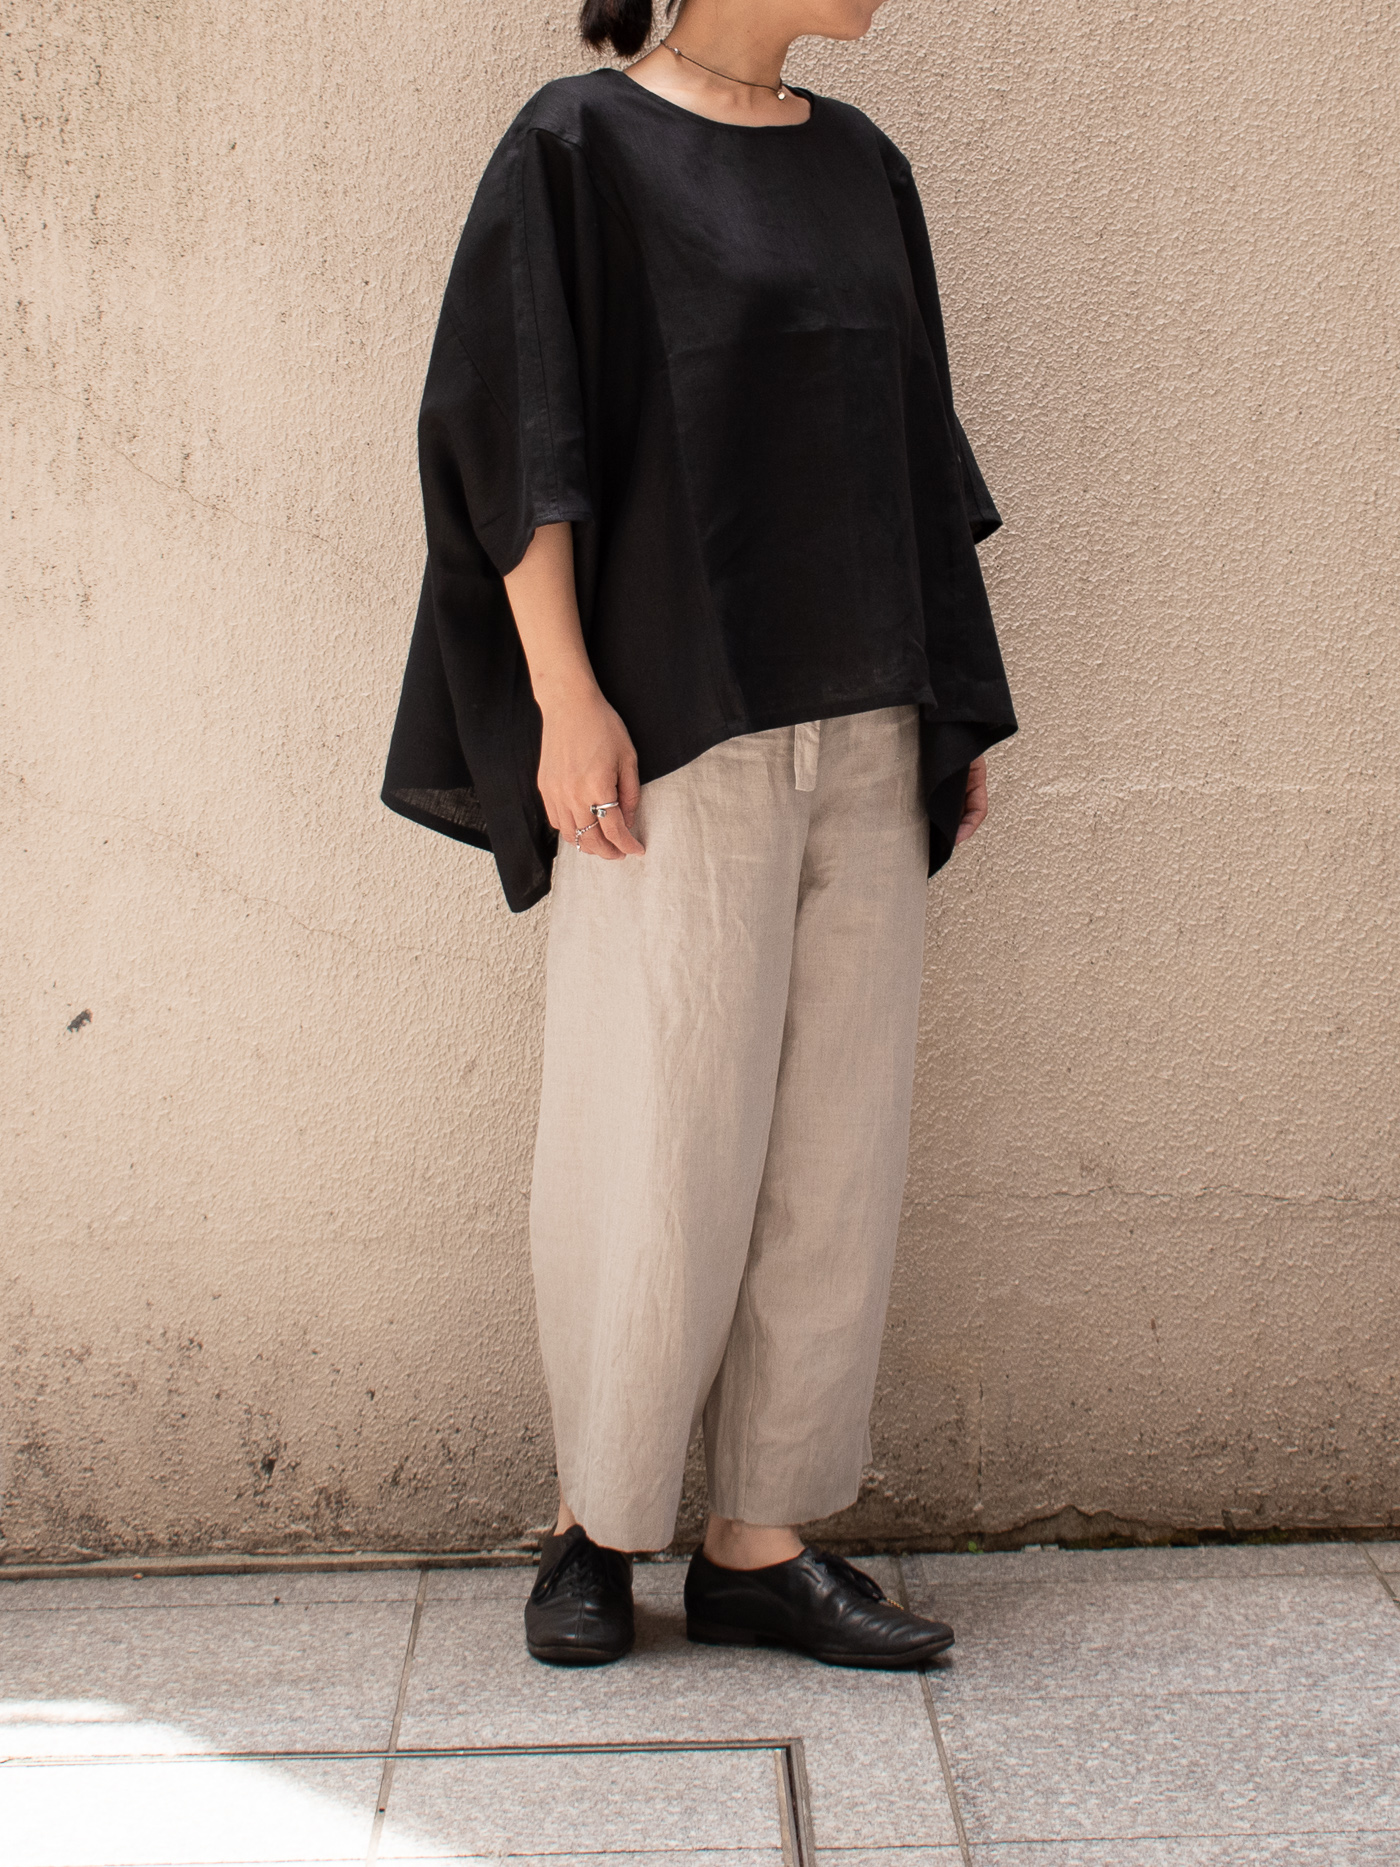 Honnete(オネット)のOversized Top